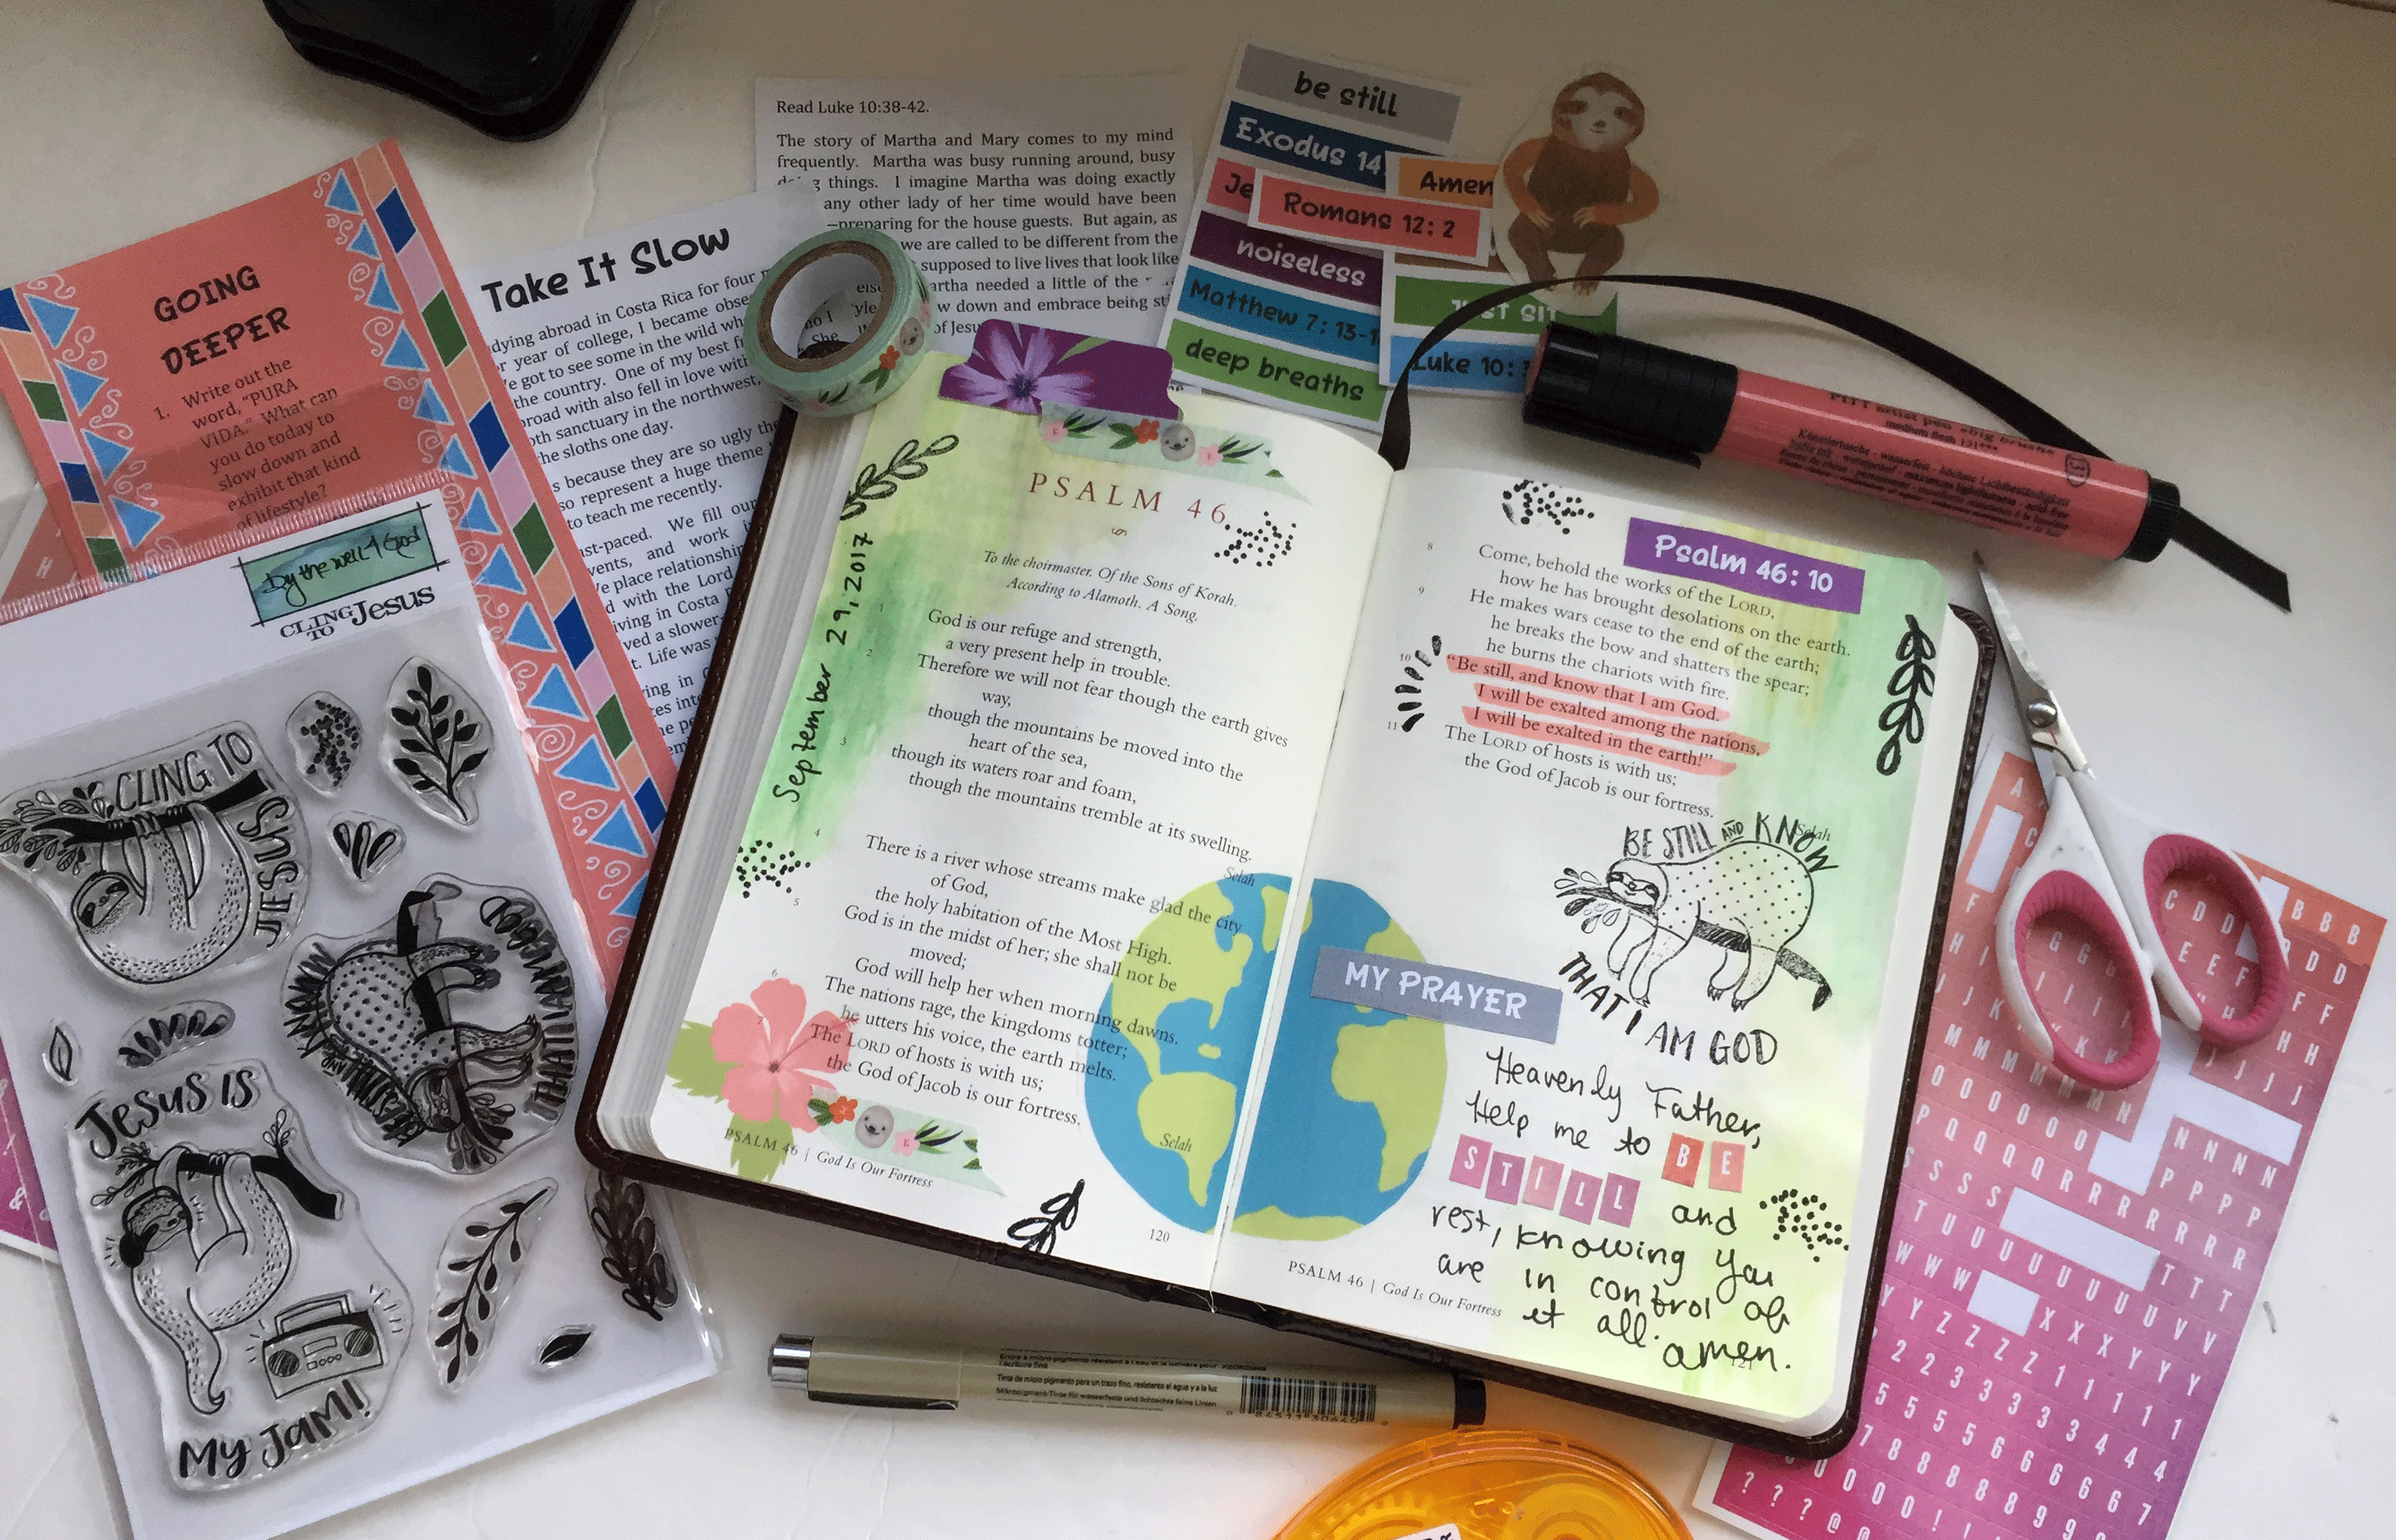 YouTube Bible journaling tutorial using the Creative Faith Take it Slow devotion - a message from God.